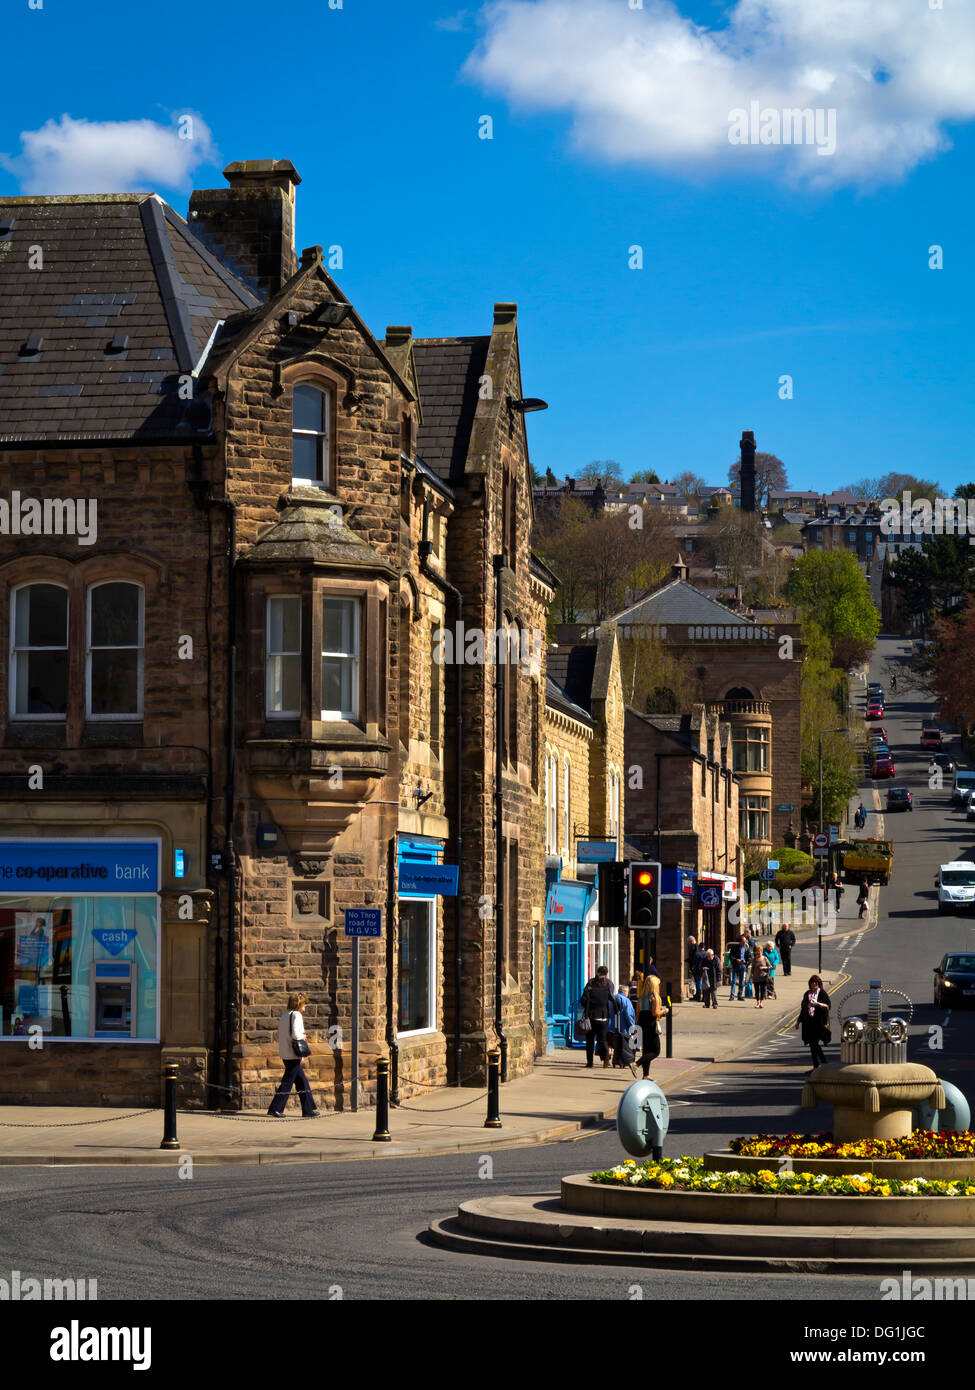 Matlock town centre showing Crown Square roundabout and the hill on Bank Road Derbyshire Dales Peak District England UK Stock Photo